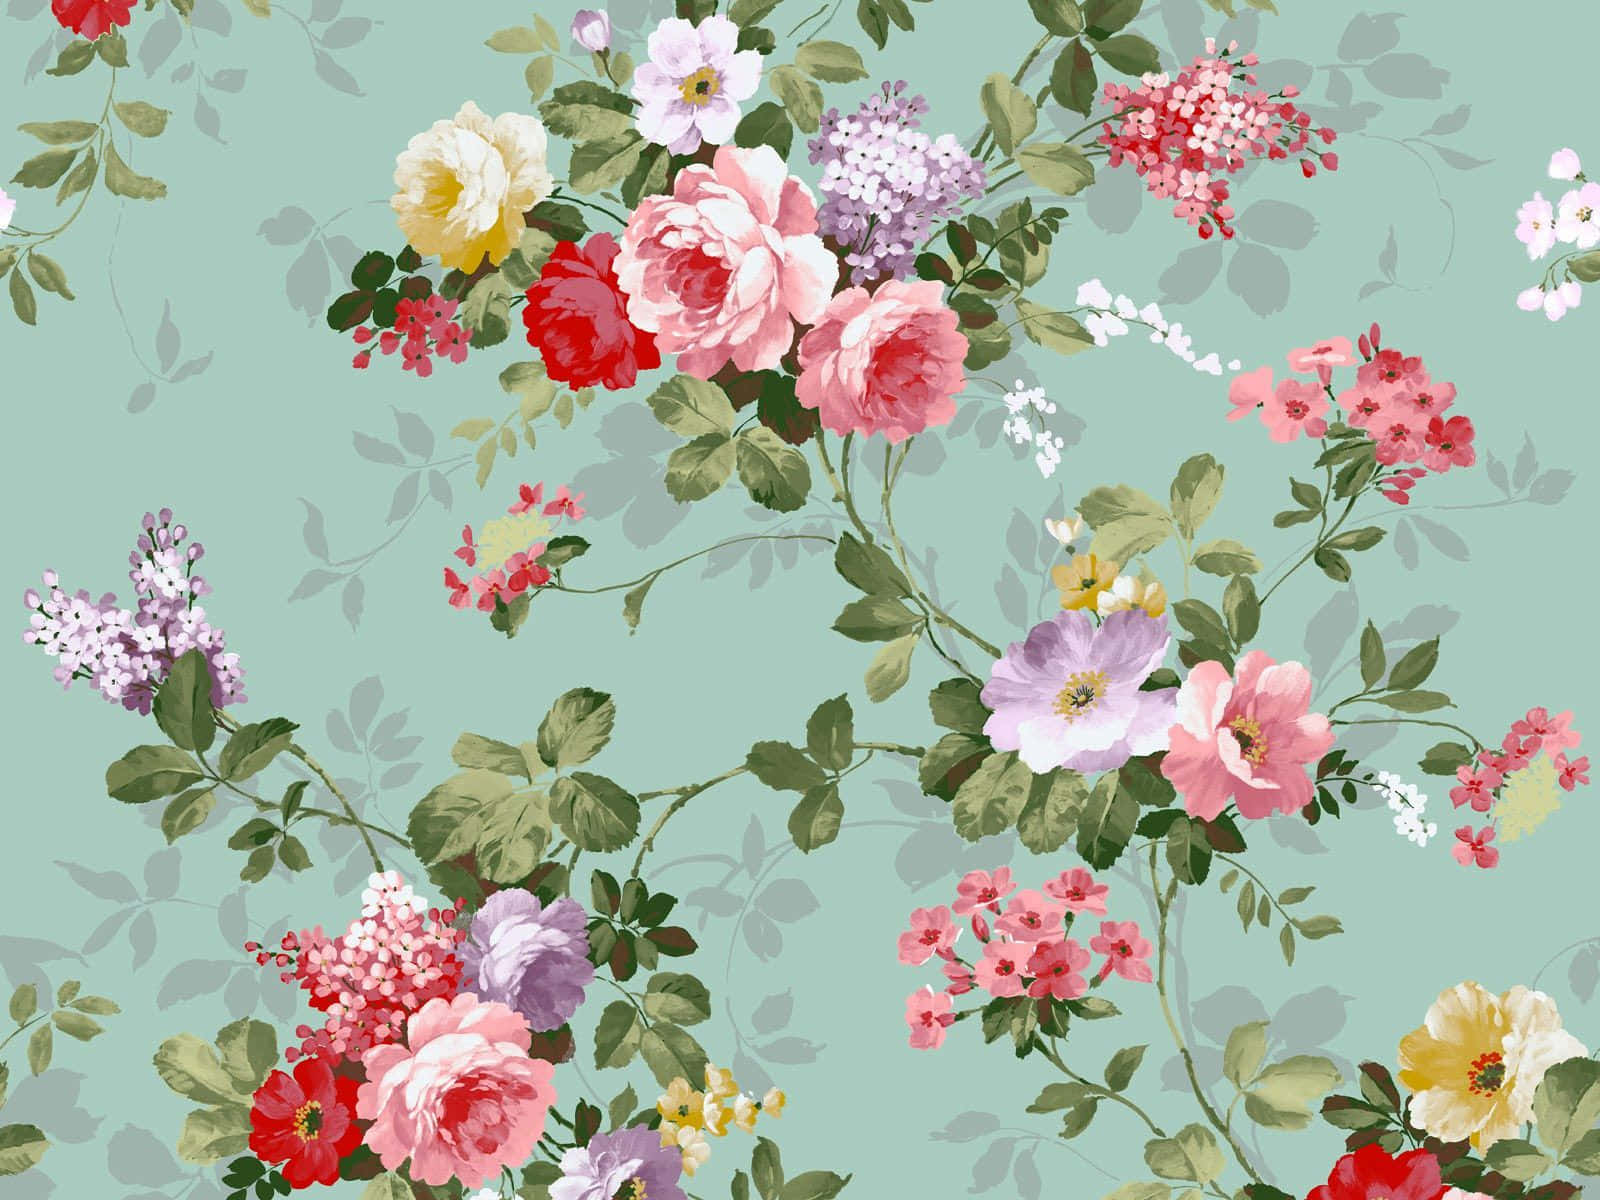 Live Life In Full Blossom With This Beautiful Flower Laptop Background! Background